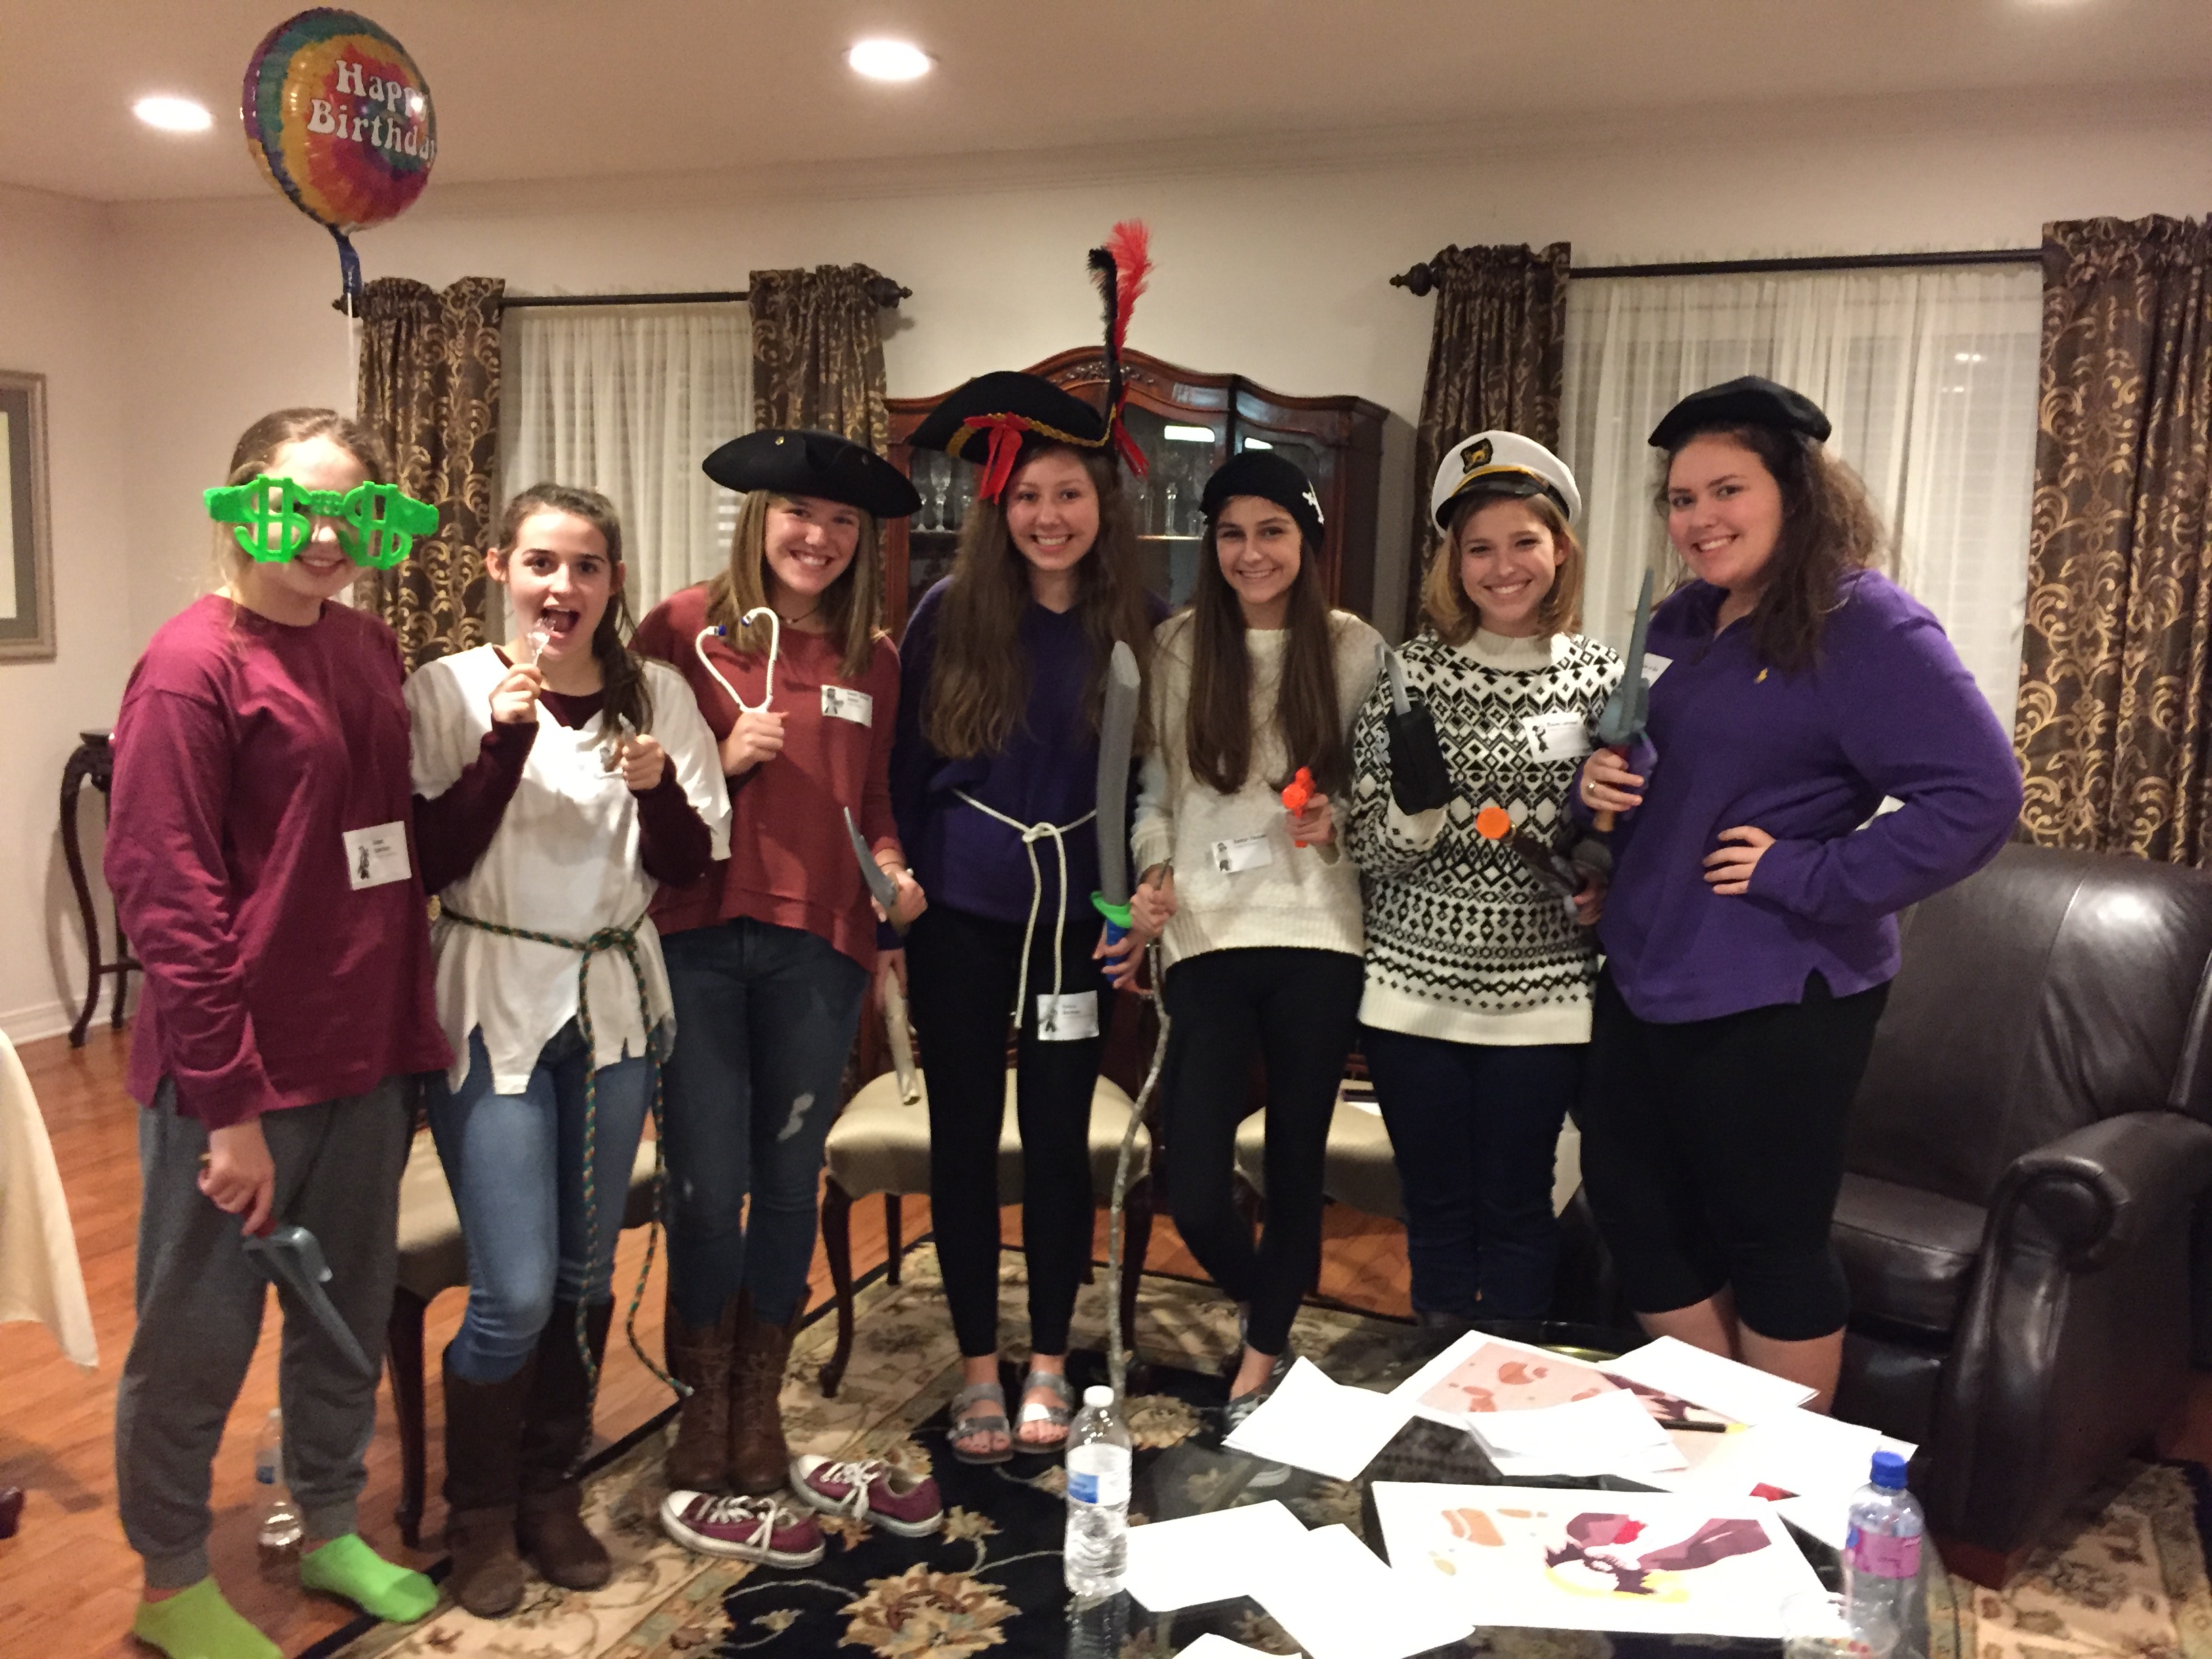 Pirate-themed murder mystery teen birthday party